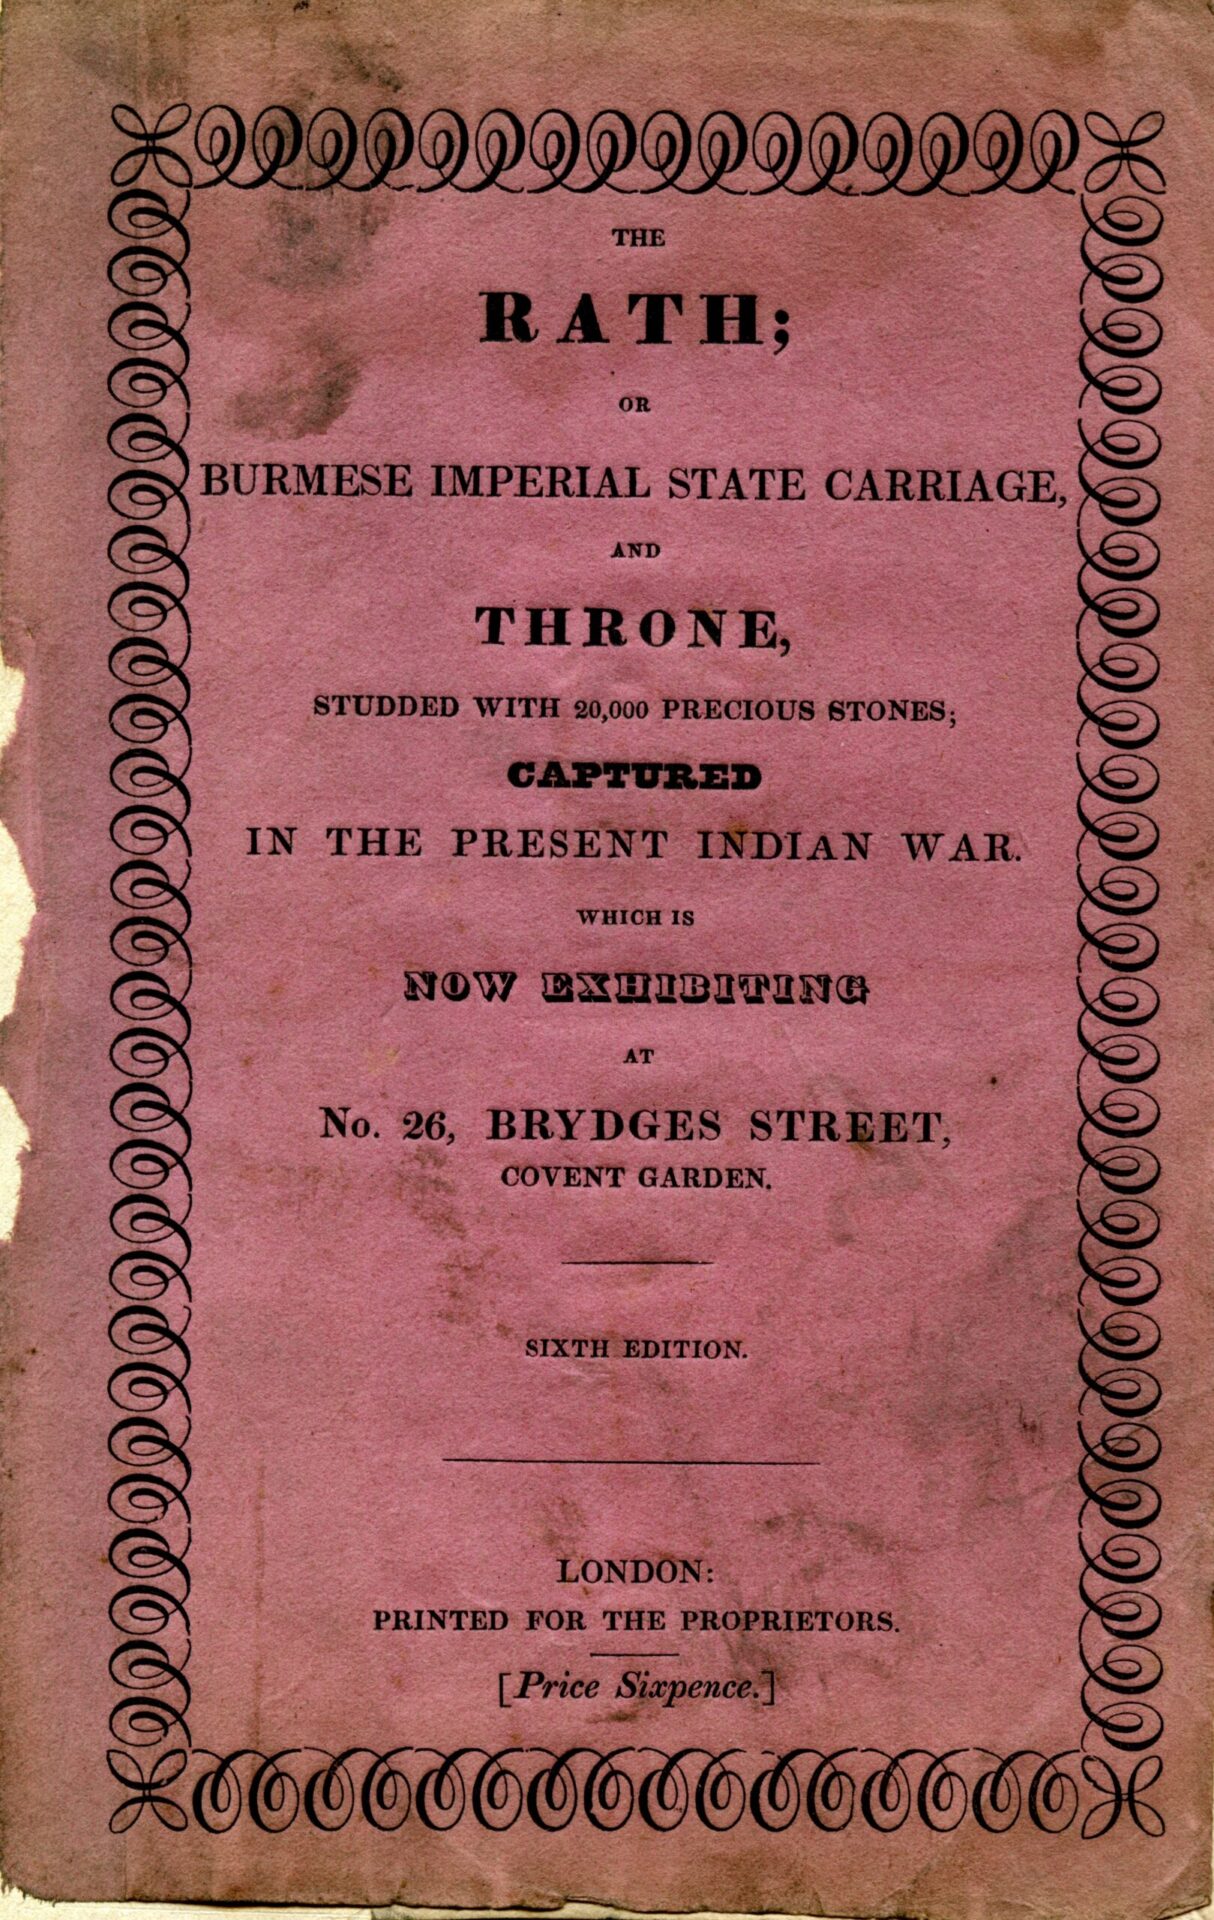 The Rath or Burmese Imperial State Carriage and Throne: 8 page booklet dated 1827